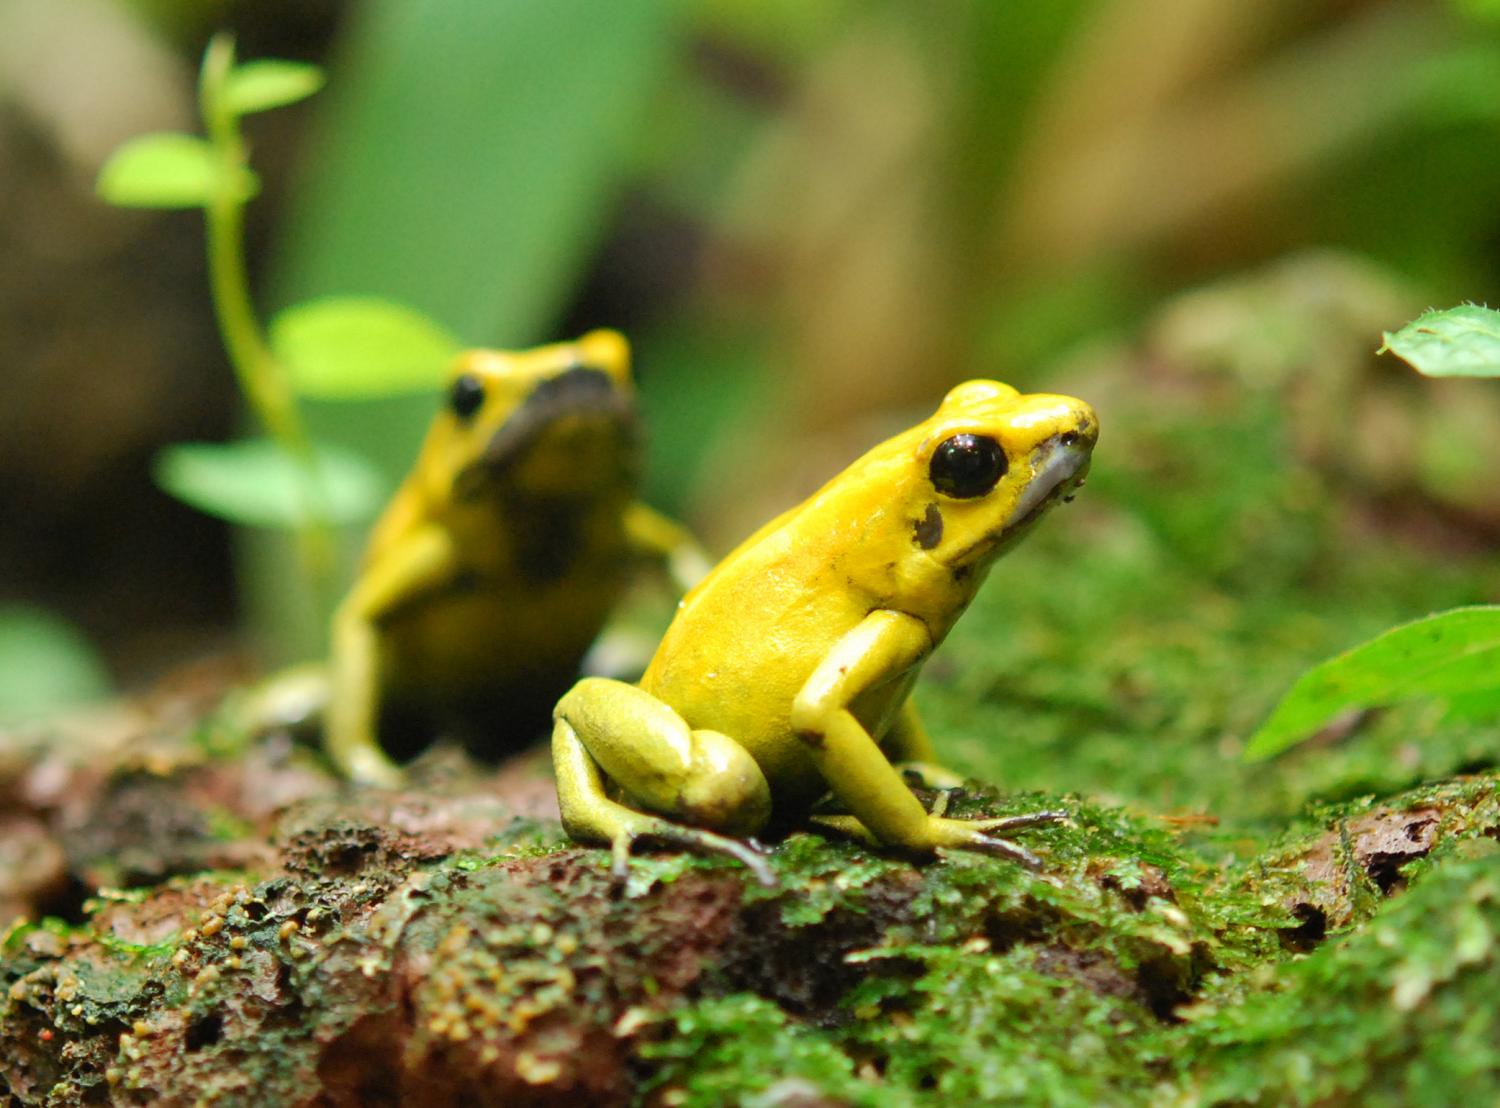 Why poison dart frogs don't poison themselves